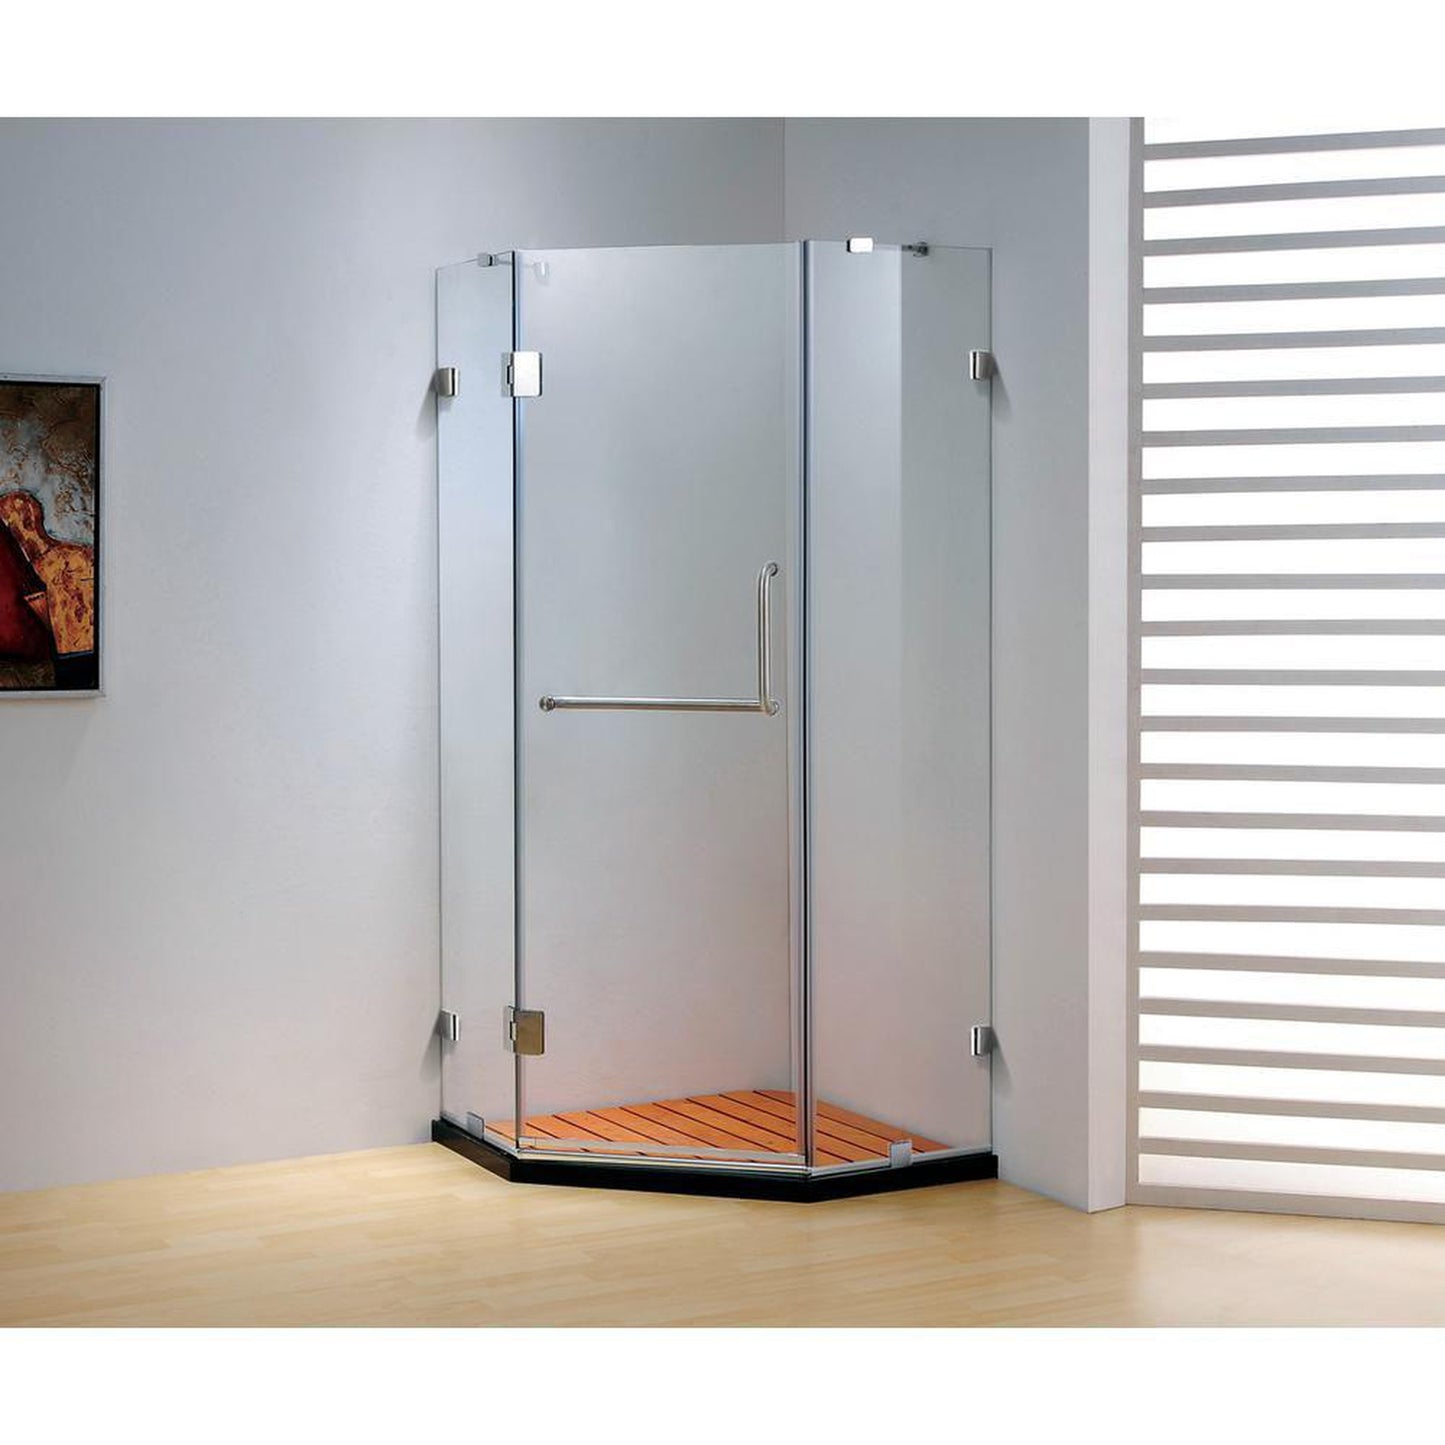 DreamWerks Frameless Clear Neo-Angle Hinged Shower Door in Chrome with Handle